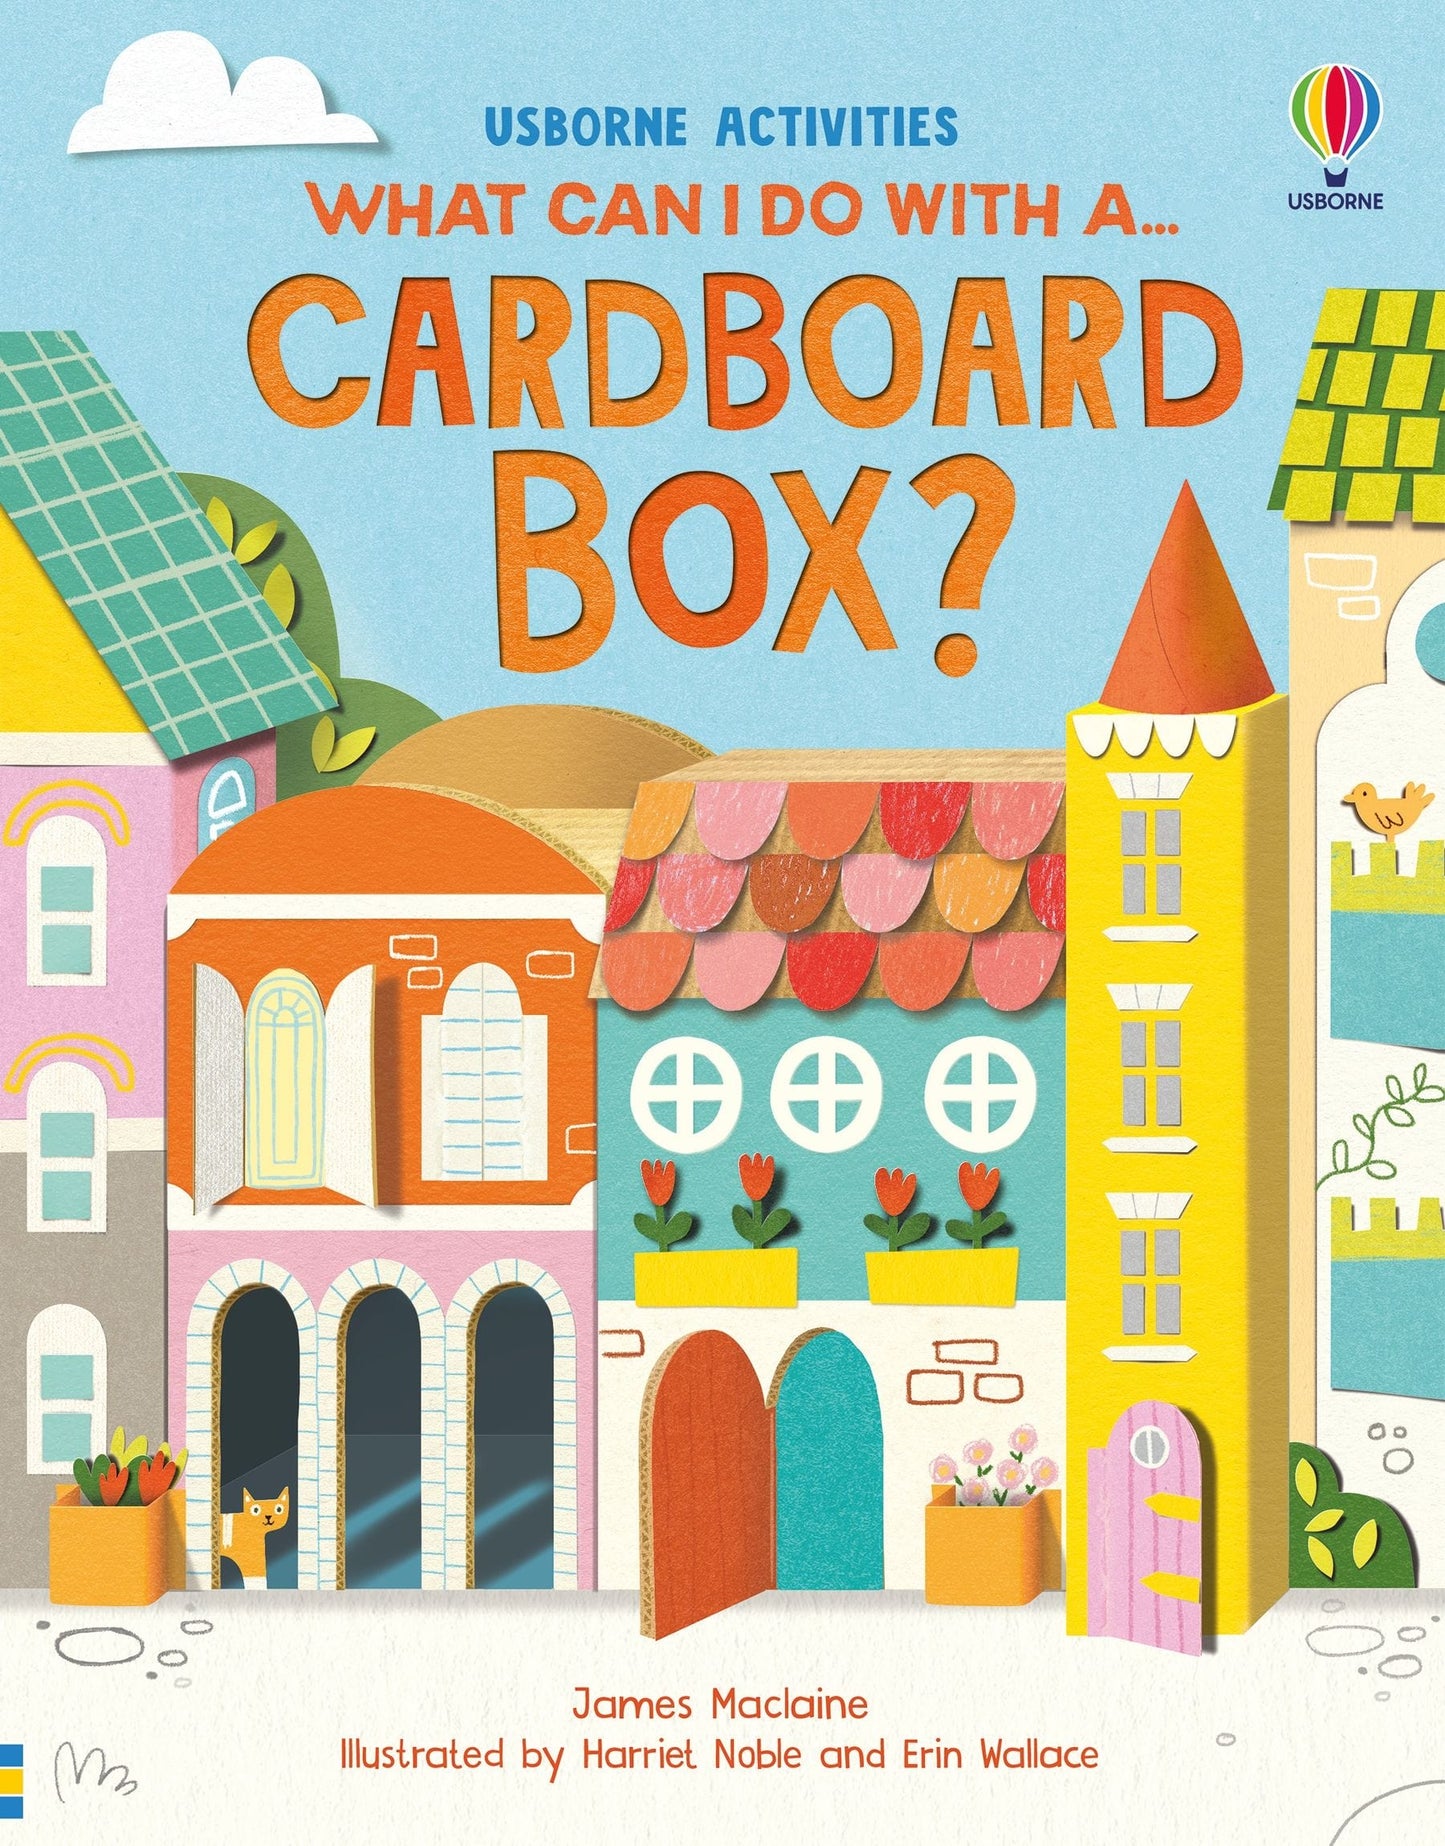 Usborne What Can I Do With a Cardboard Box? James Maclaine  Illustrated by Harriet Noble, Erin Wallace